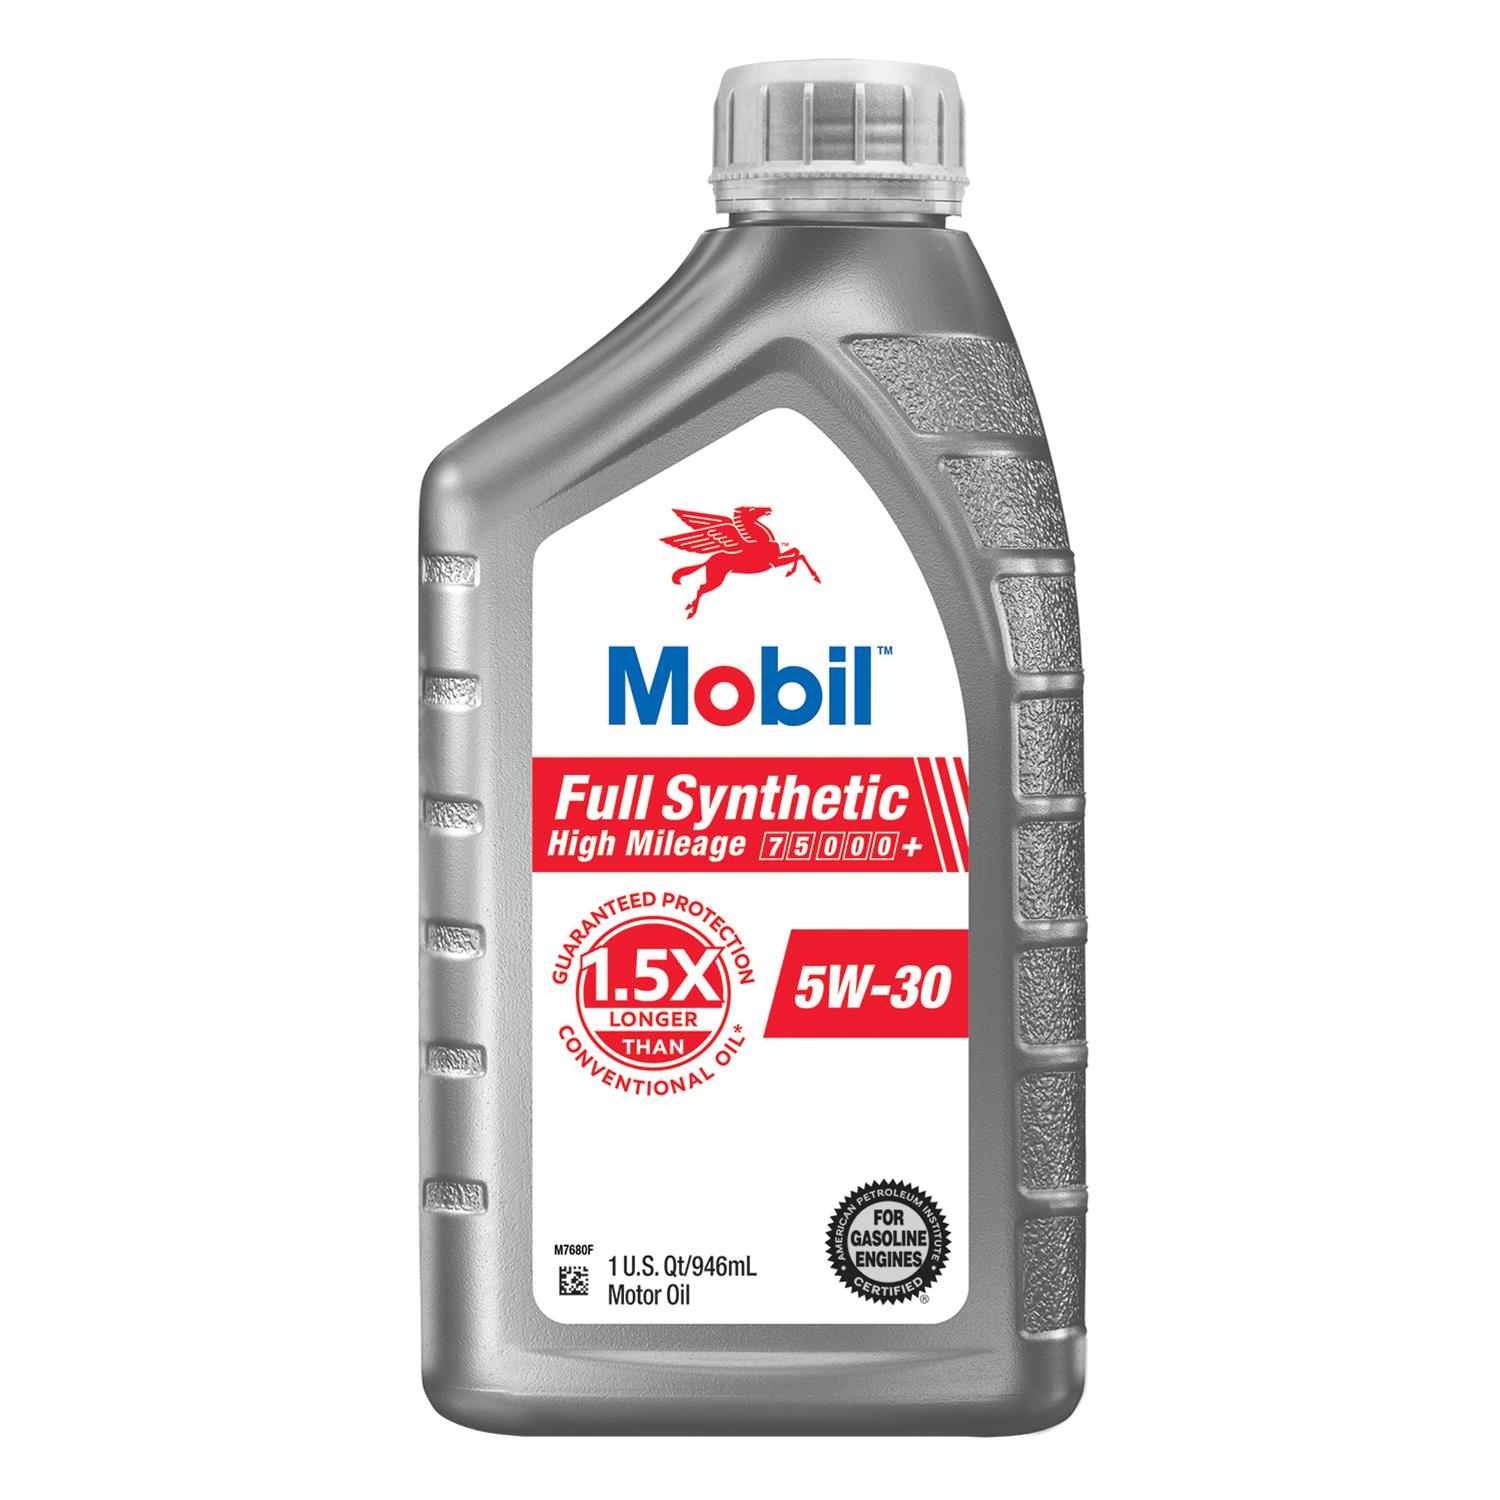 mobil-1-125201-1-mobil-1-full-synthetic-high-mileage-motor-oil-summit